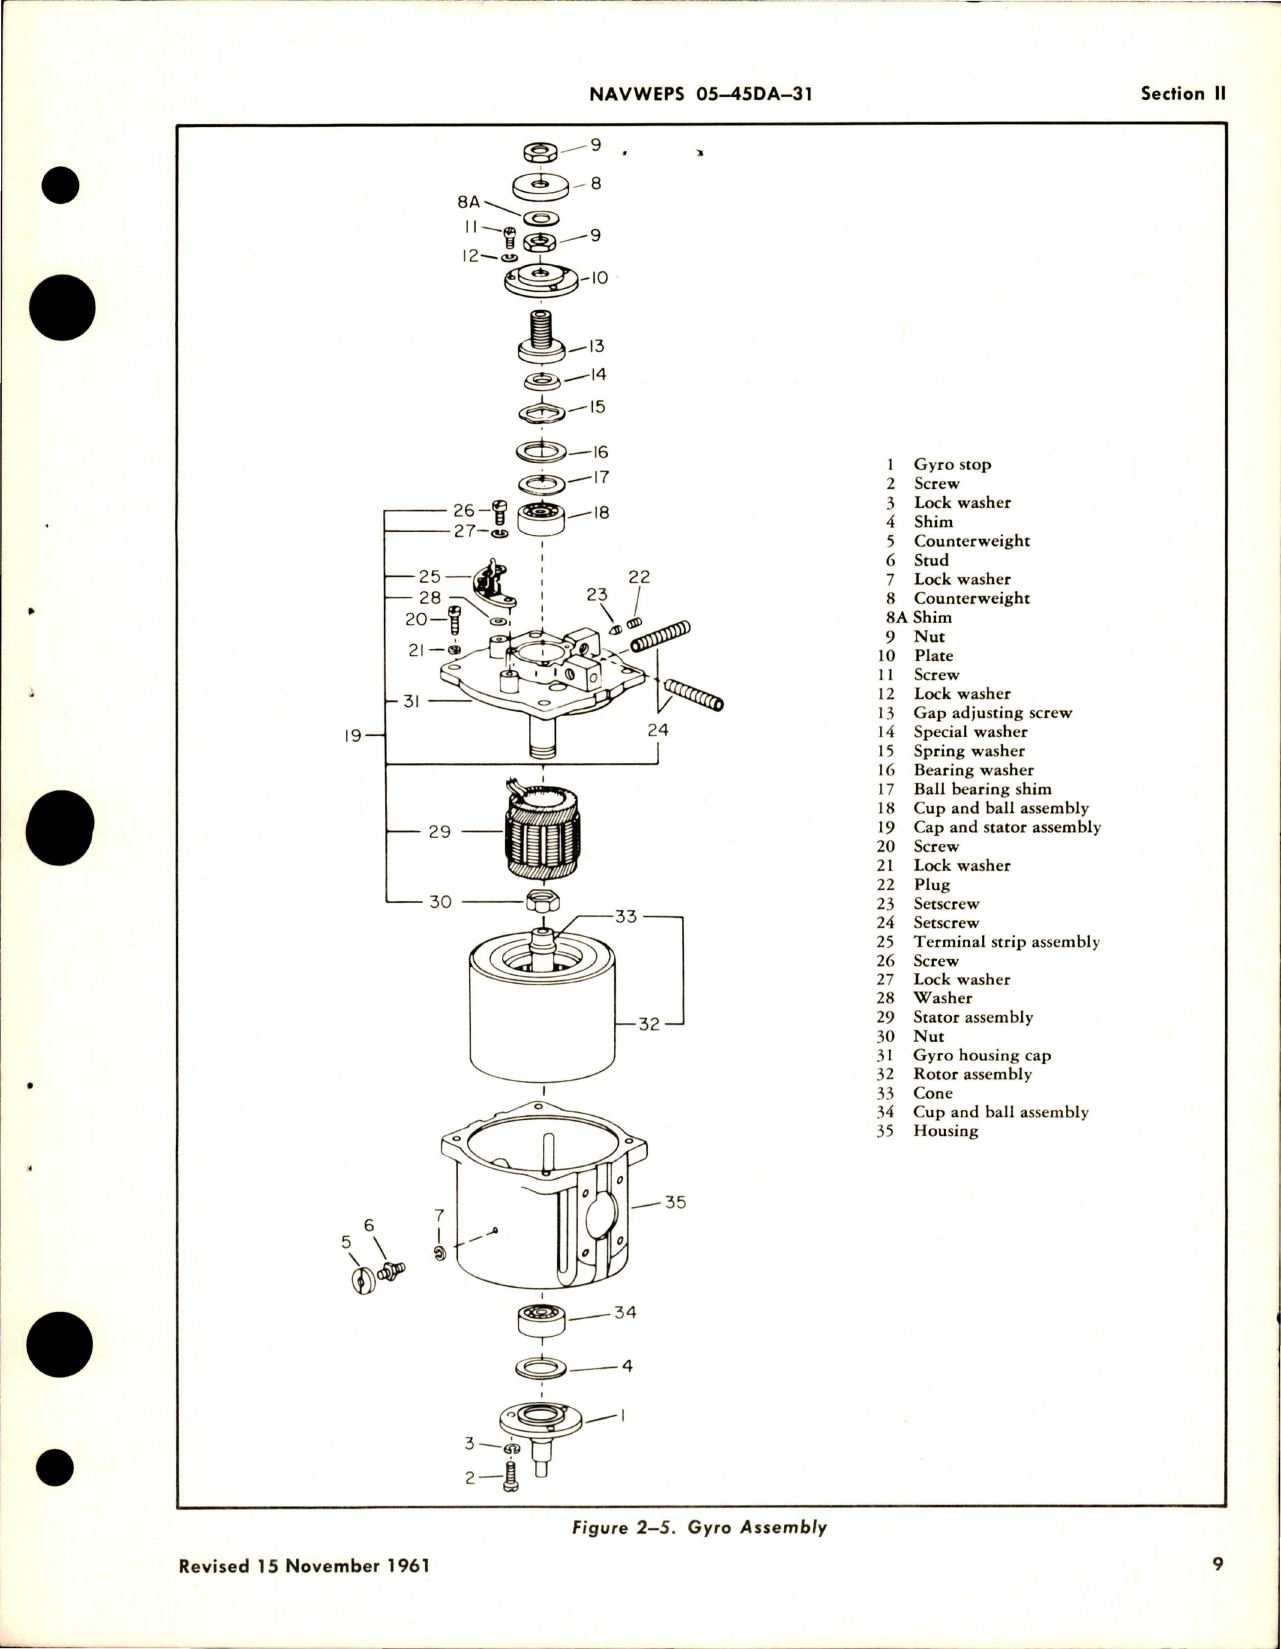 Sample page 7 from AirCorps Library document: Overhaul Instructions for Automatic Pilot Roll and Pitch Control - Part 15836-1-A